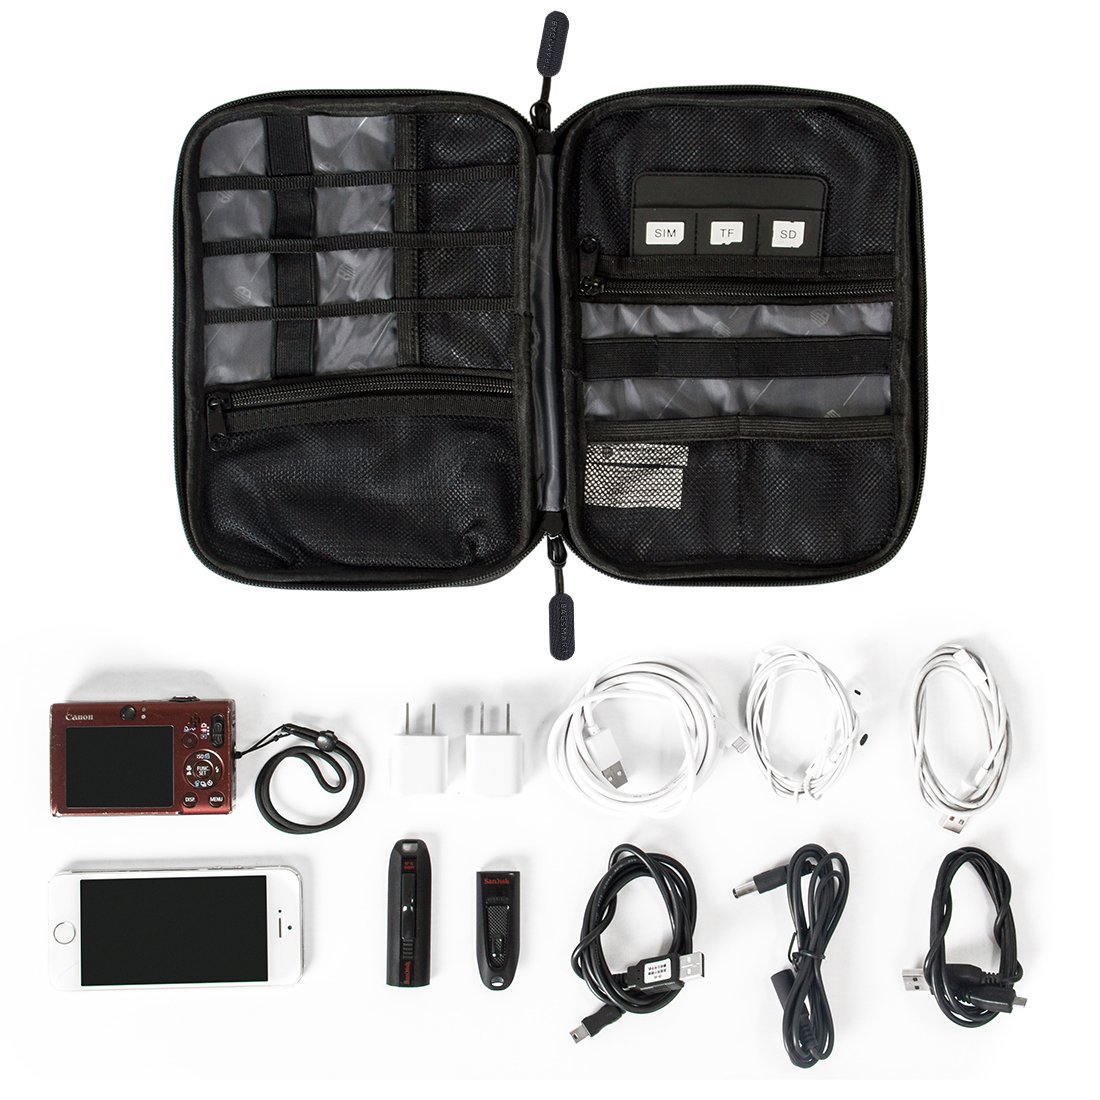 Normally $26, this electronics organizer is 54 percent off with this code (Photo via Bagsmart)